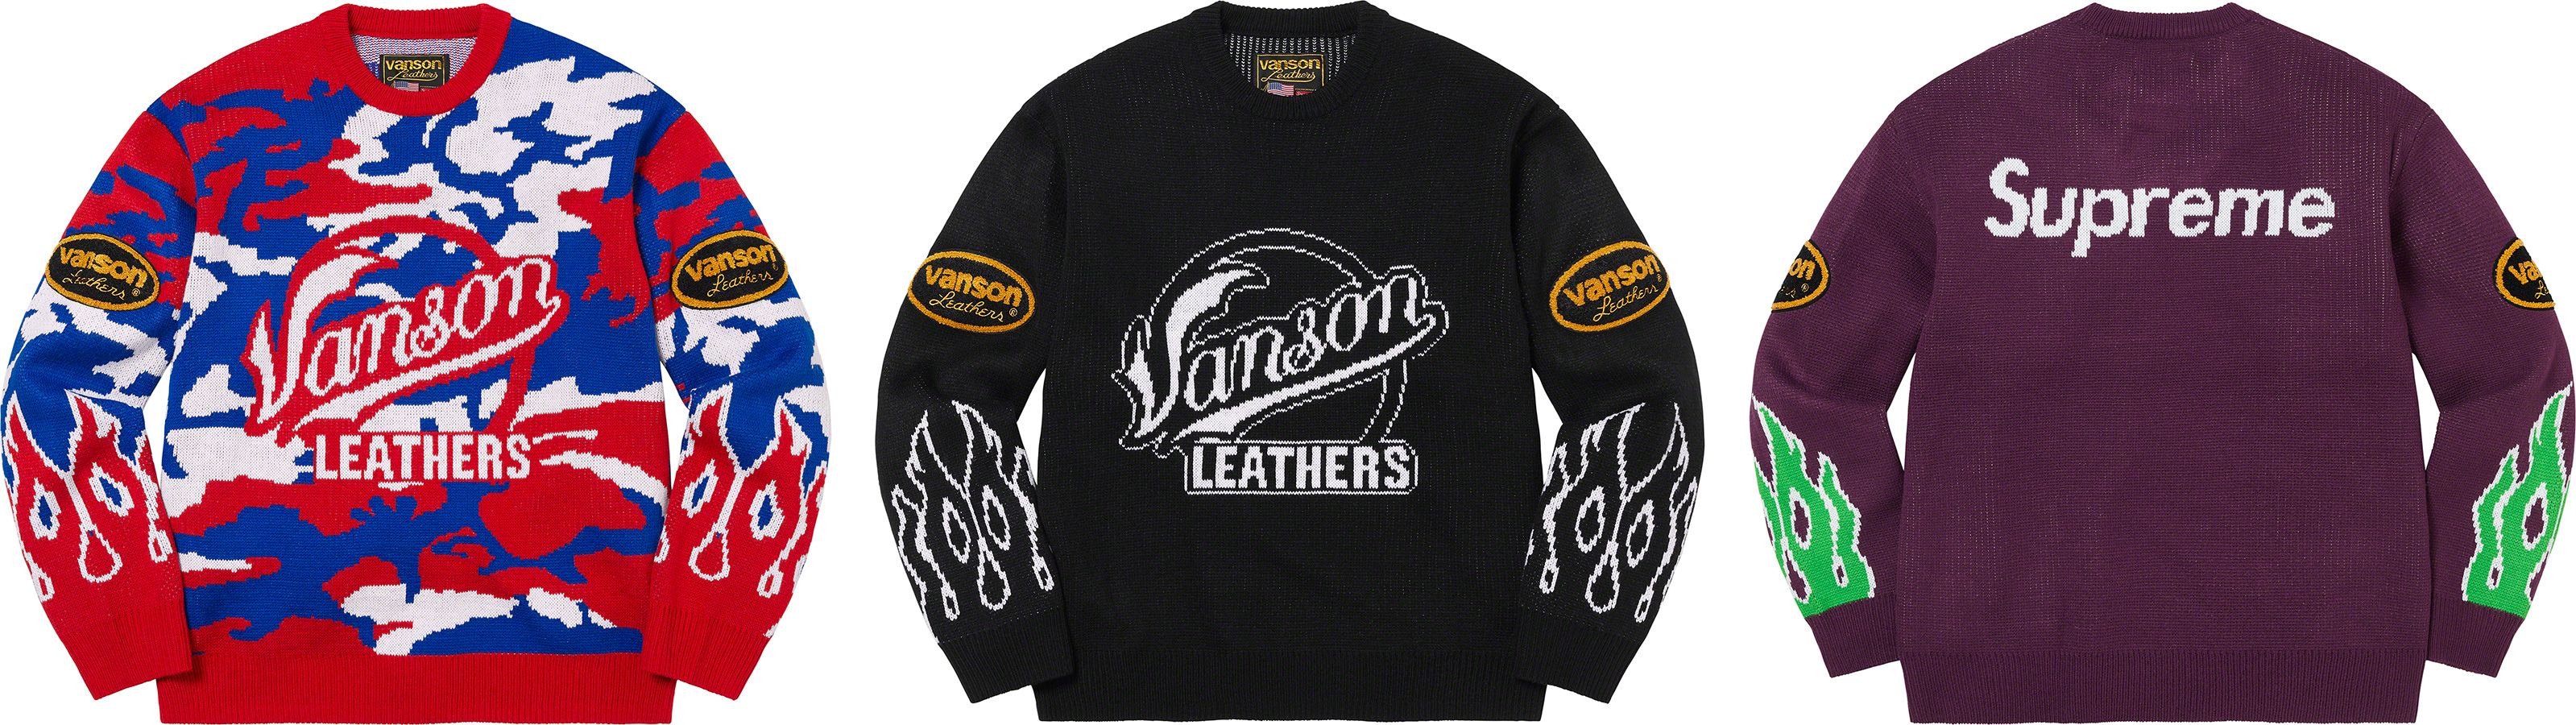 Supreme®/Vanson Leathers® Sweater - Spring/Summer 2022 Preview 